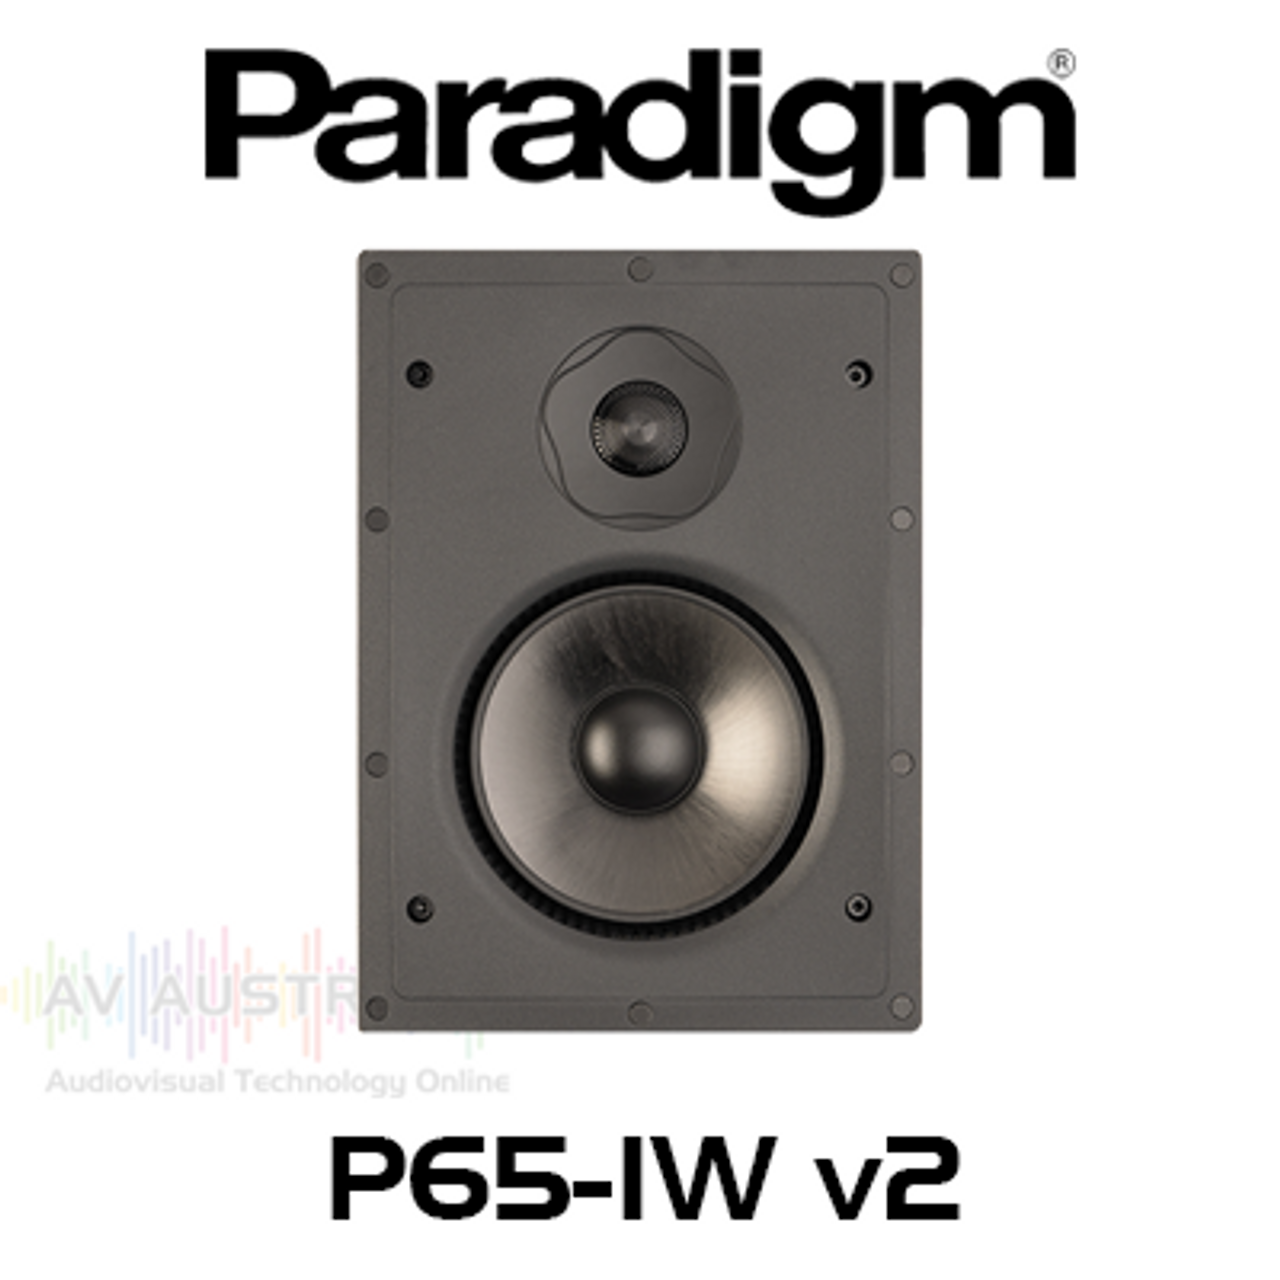 Paradigm CI Pro P65-IW v2 6.5" Carbon-X In-Wall Speaker (Each)